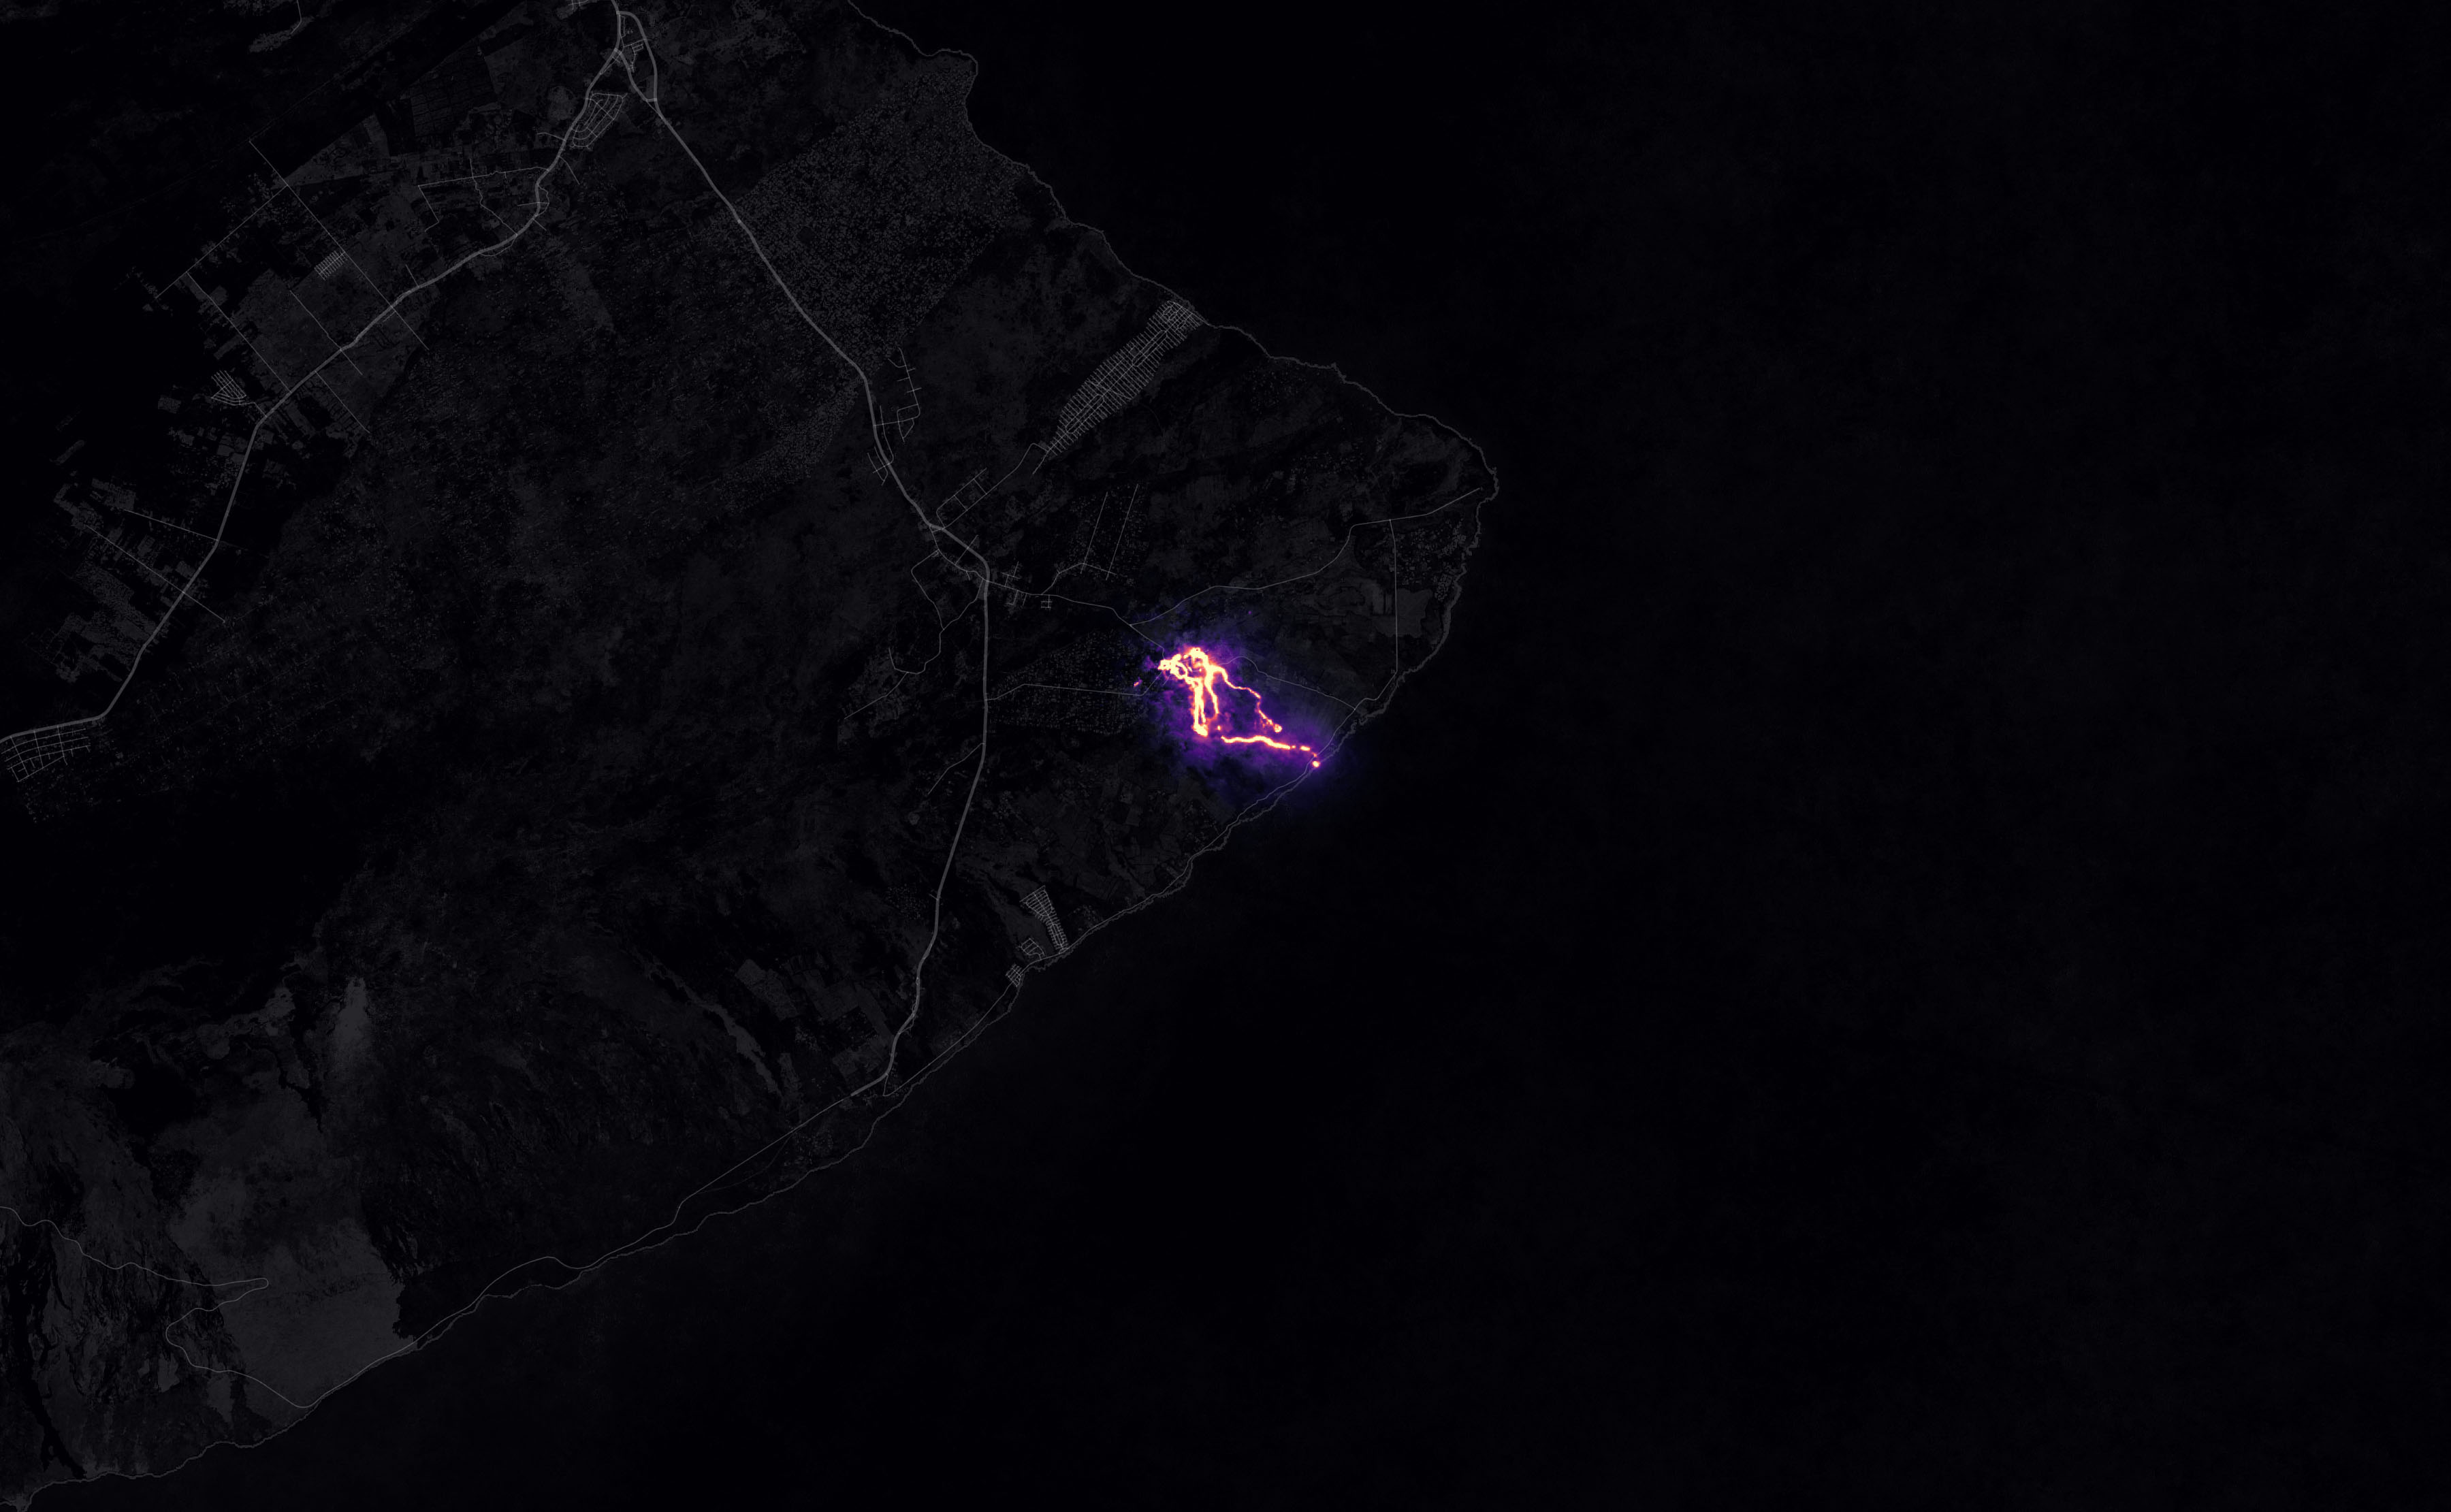 Incredible Image Shows Kilauea Volcano From Space at Night | Time